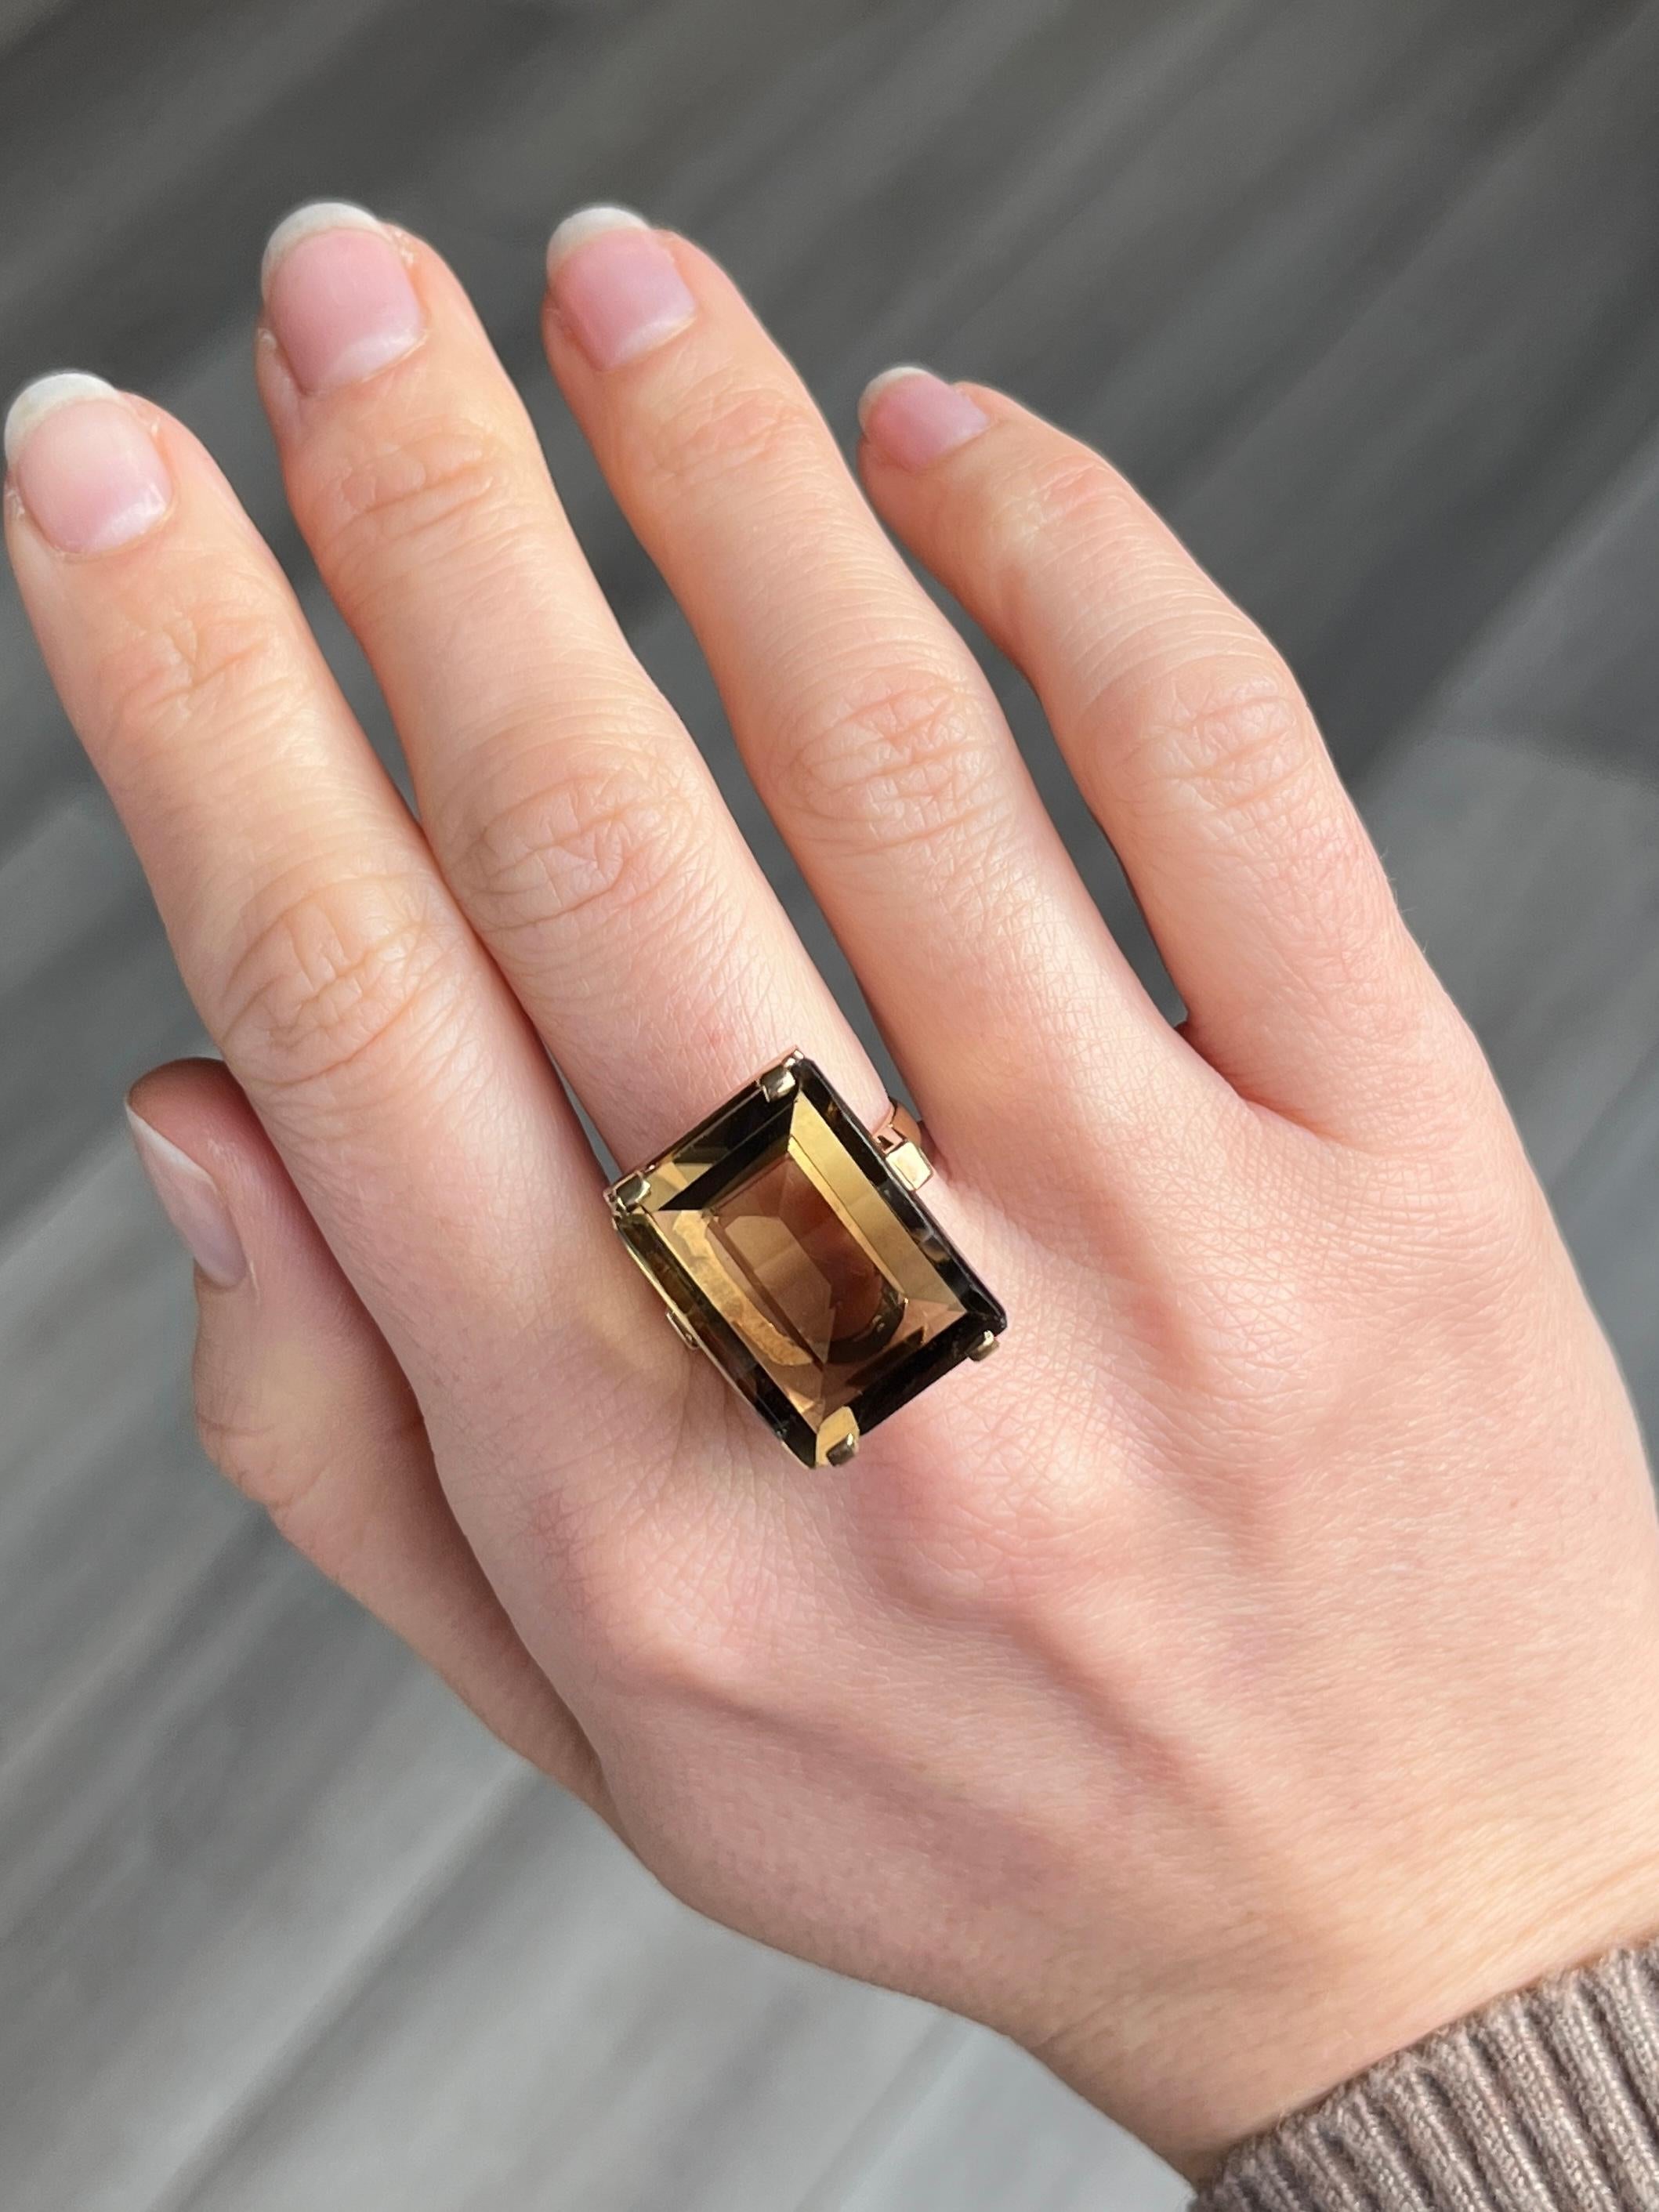 Modern Vintage Smokey Quartz and 9 Carat Gold Cocktail Ring For Sale